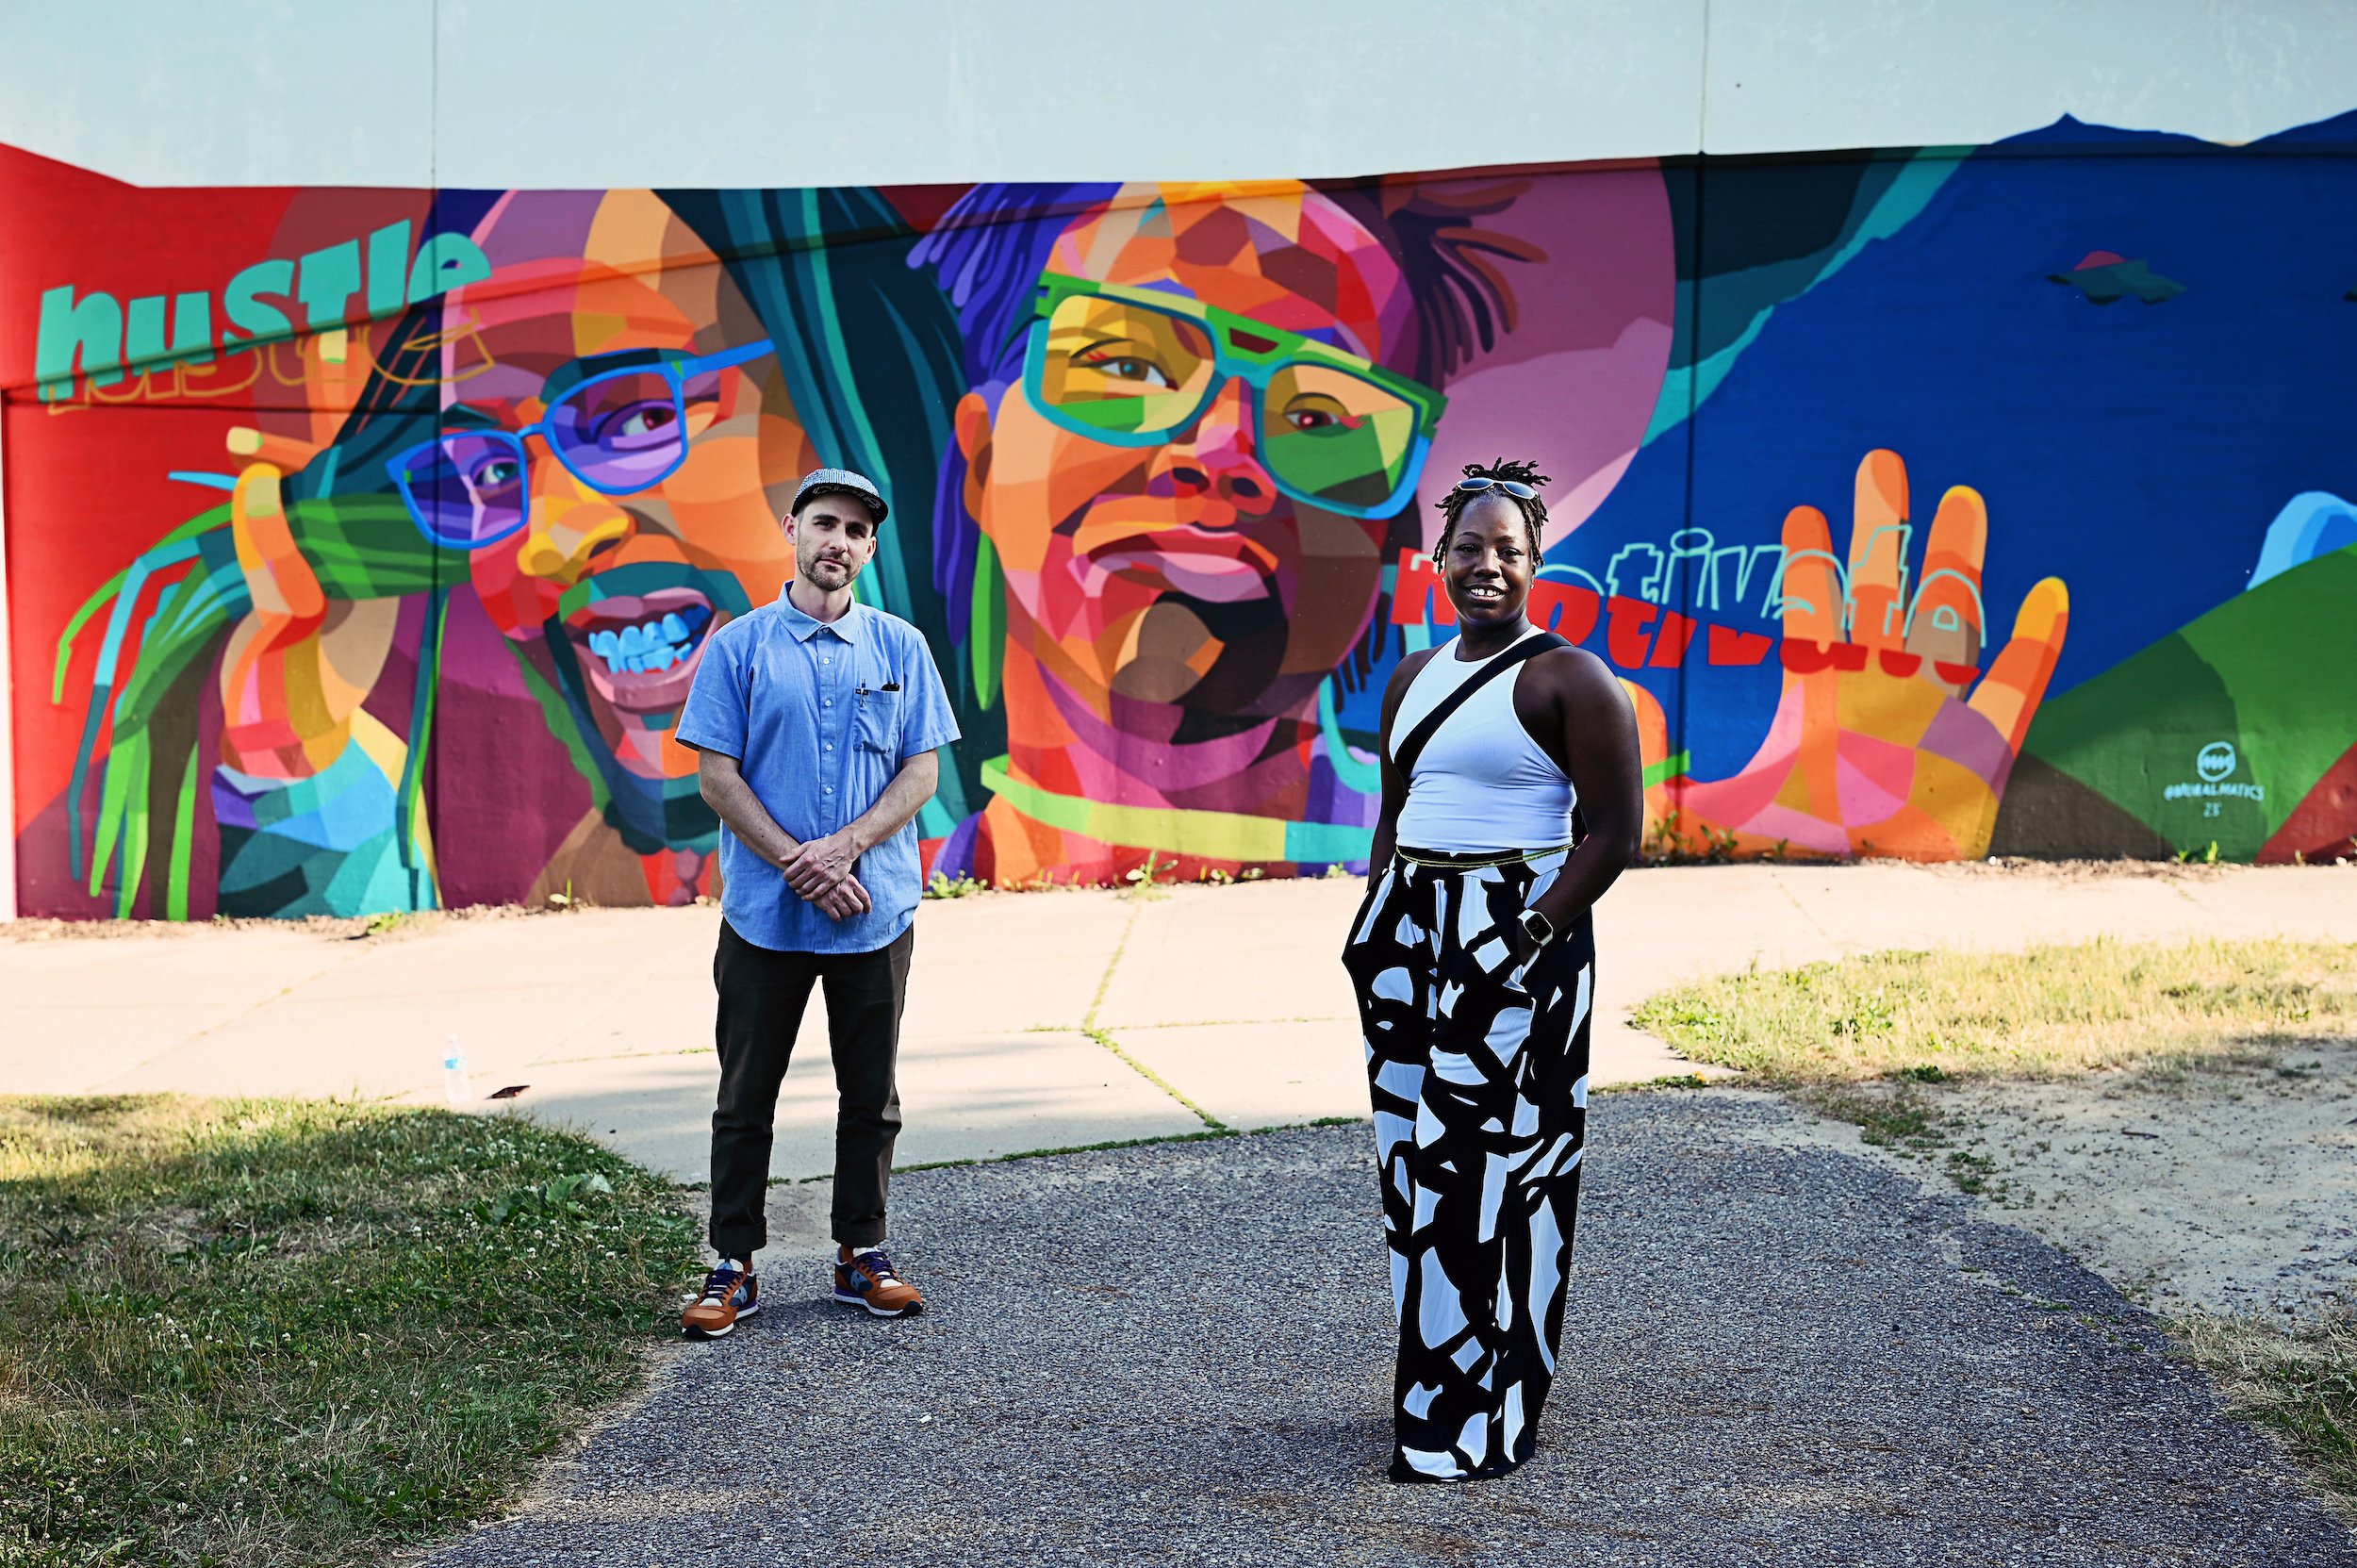  Muralmatics founder Dustin Hunt posing with a Lansing, Michigan resident in front of the mural ‘Hustle &amp; Motivate’ 